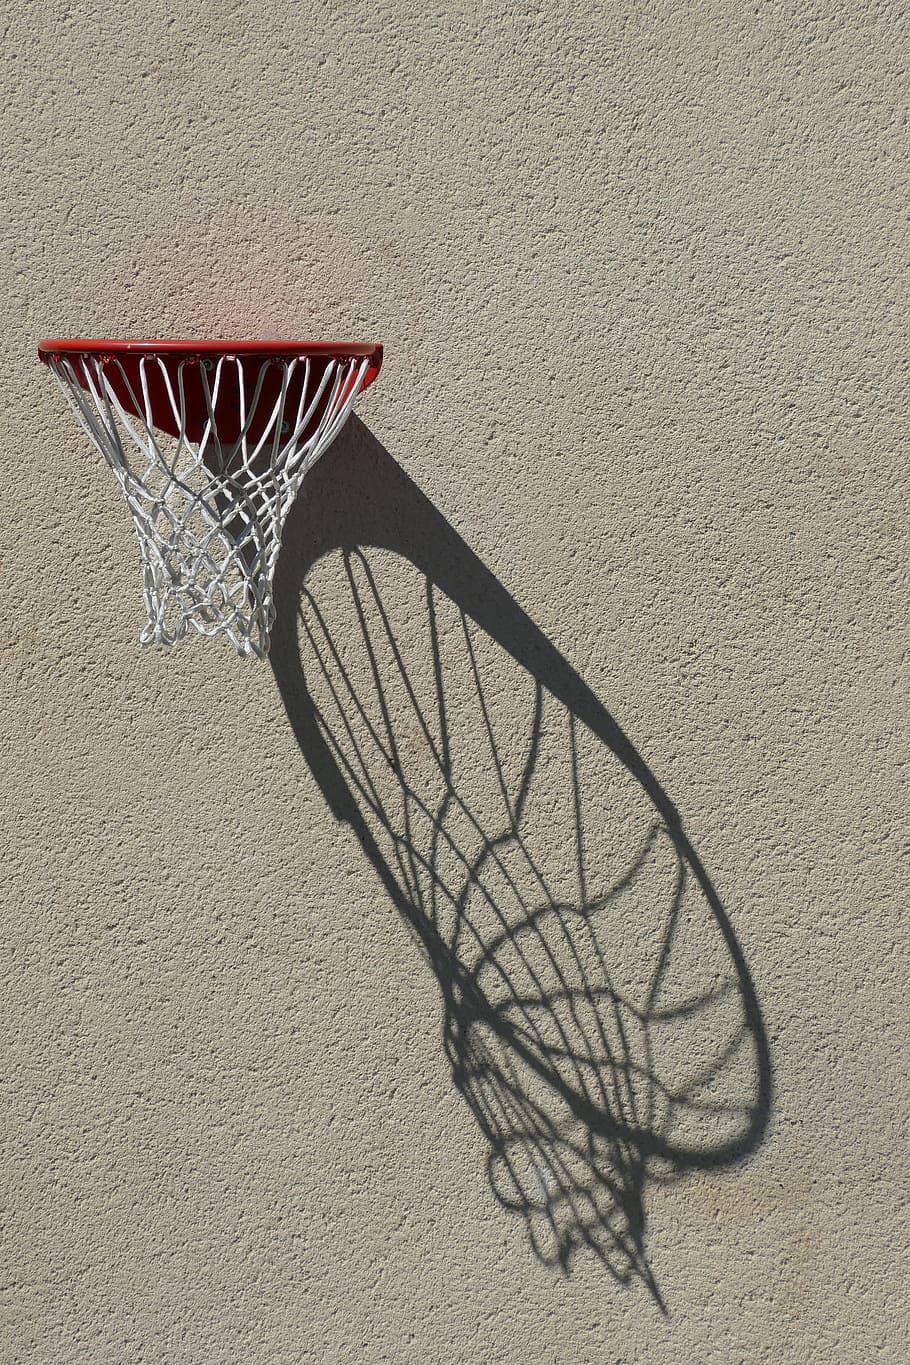 basket, basketball, sports, shadow, wall, basketball hoop, sport, basketball - sport, net - sports equipment, wall - building feature